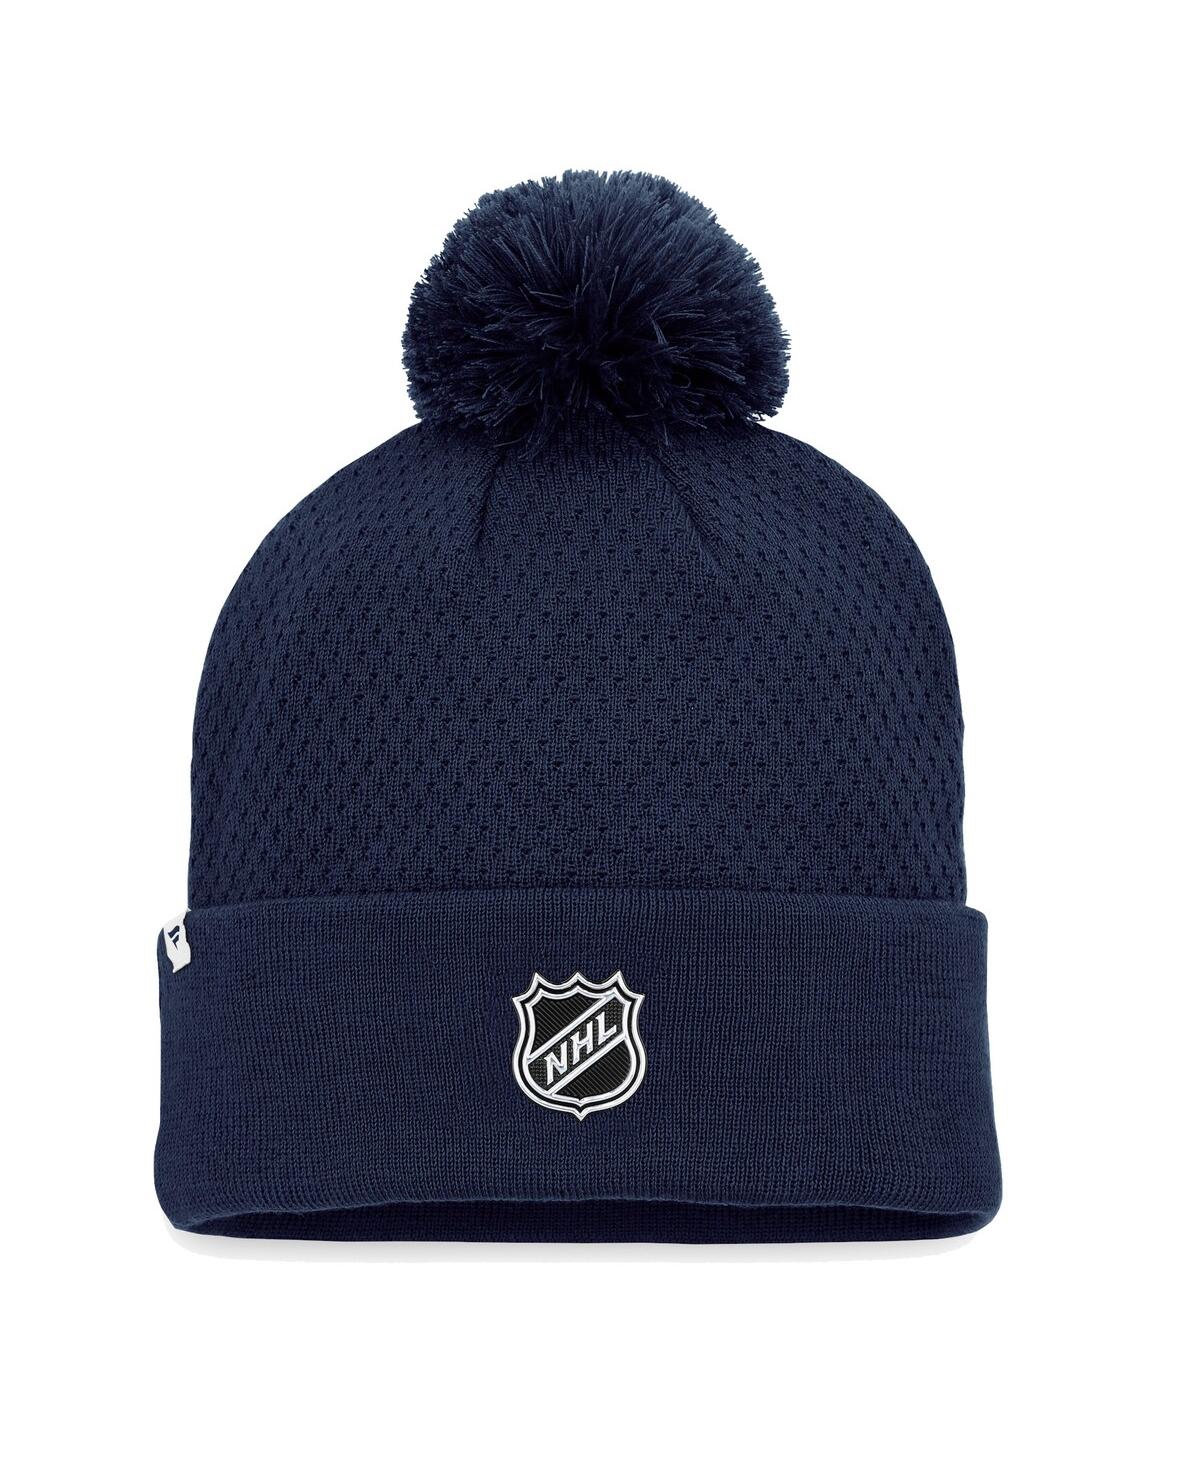 Shop Fanatics Women's  Navy Colorado Avalanche Authentic Pro Road Cuffed Knit Hat With Pom